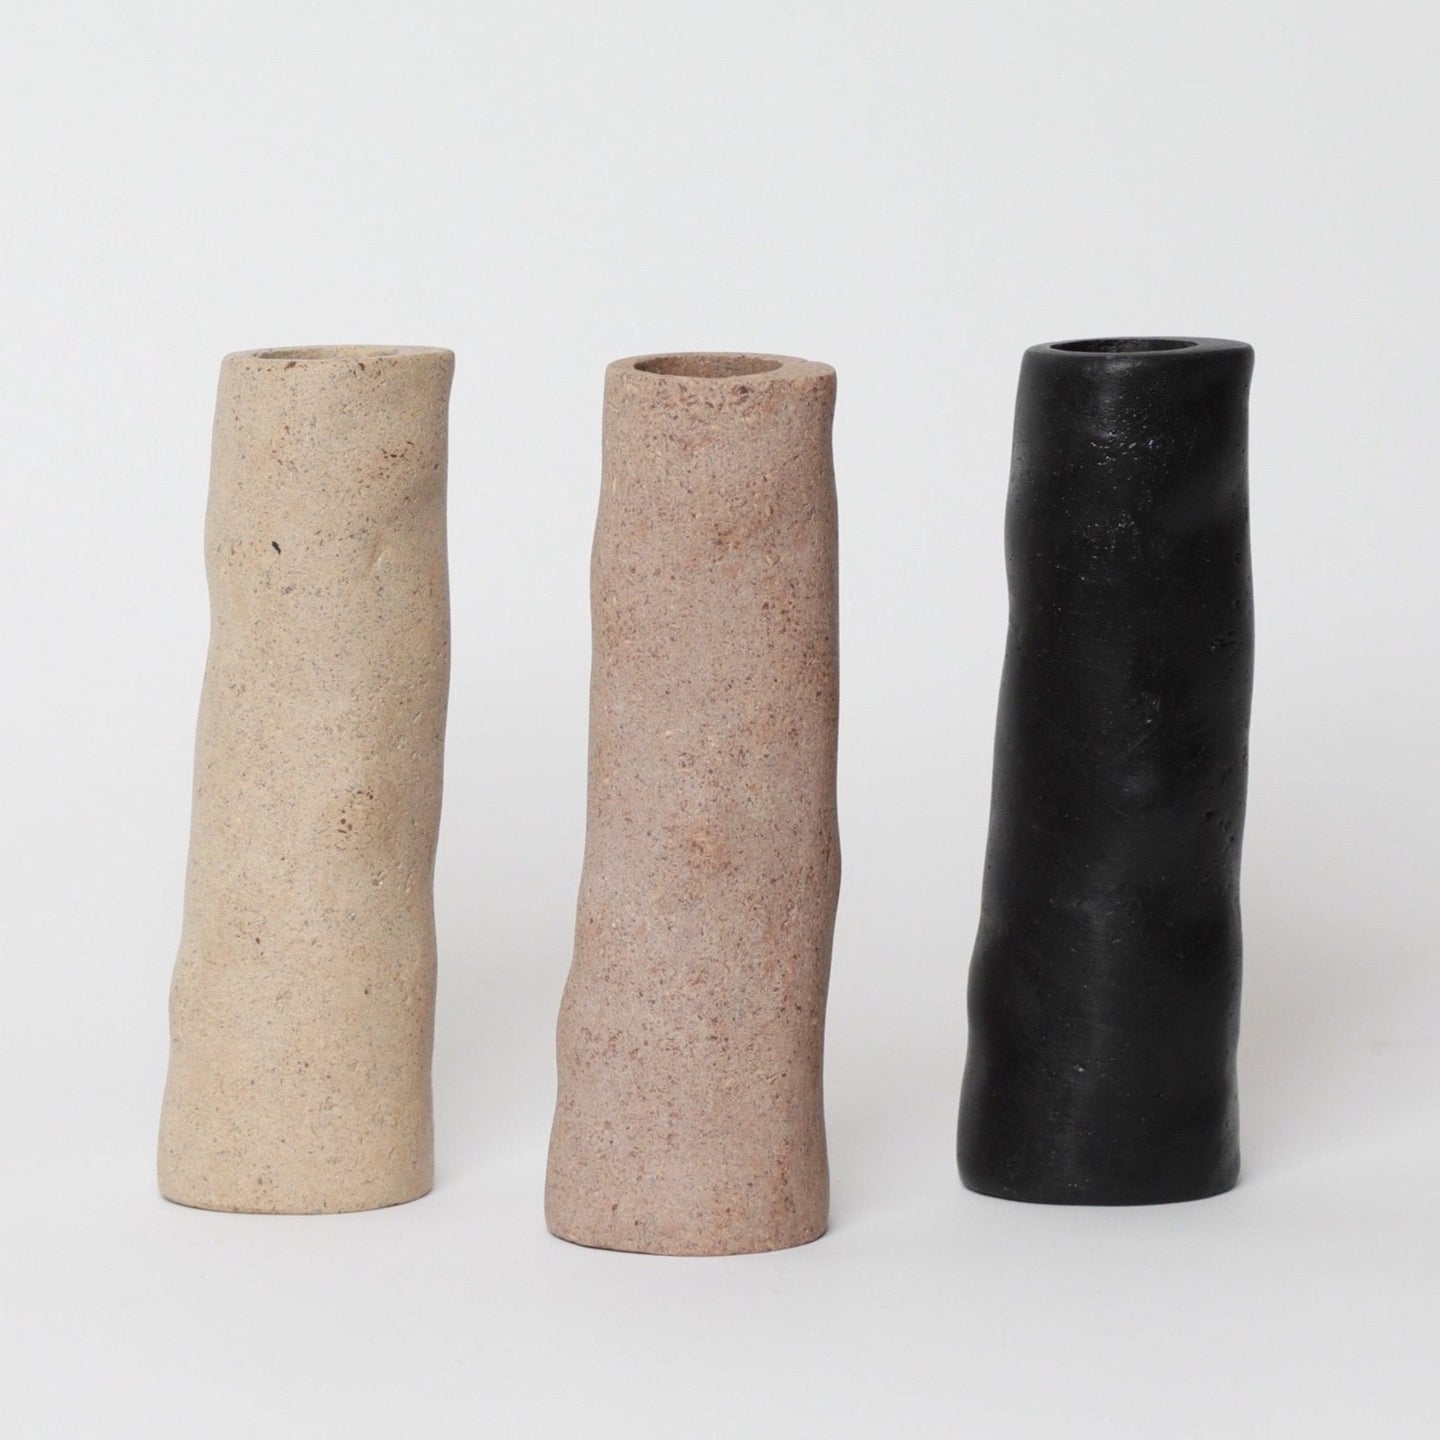 PineResin Vase | made from pine resin, bark, beeswax and charcoal - THE HOME OF SUSTAINABLE THINGS